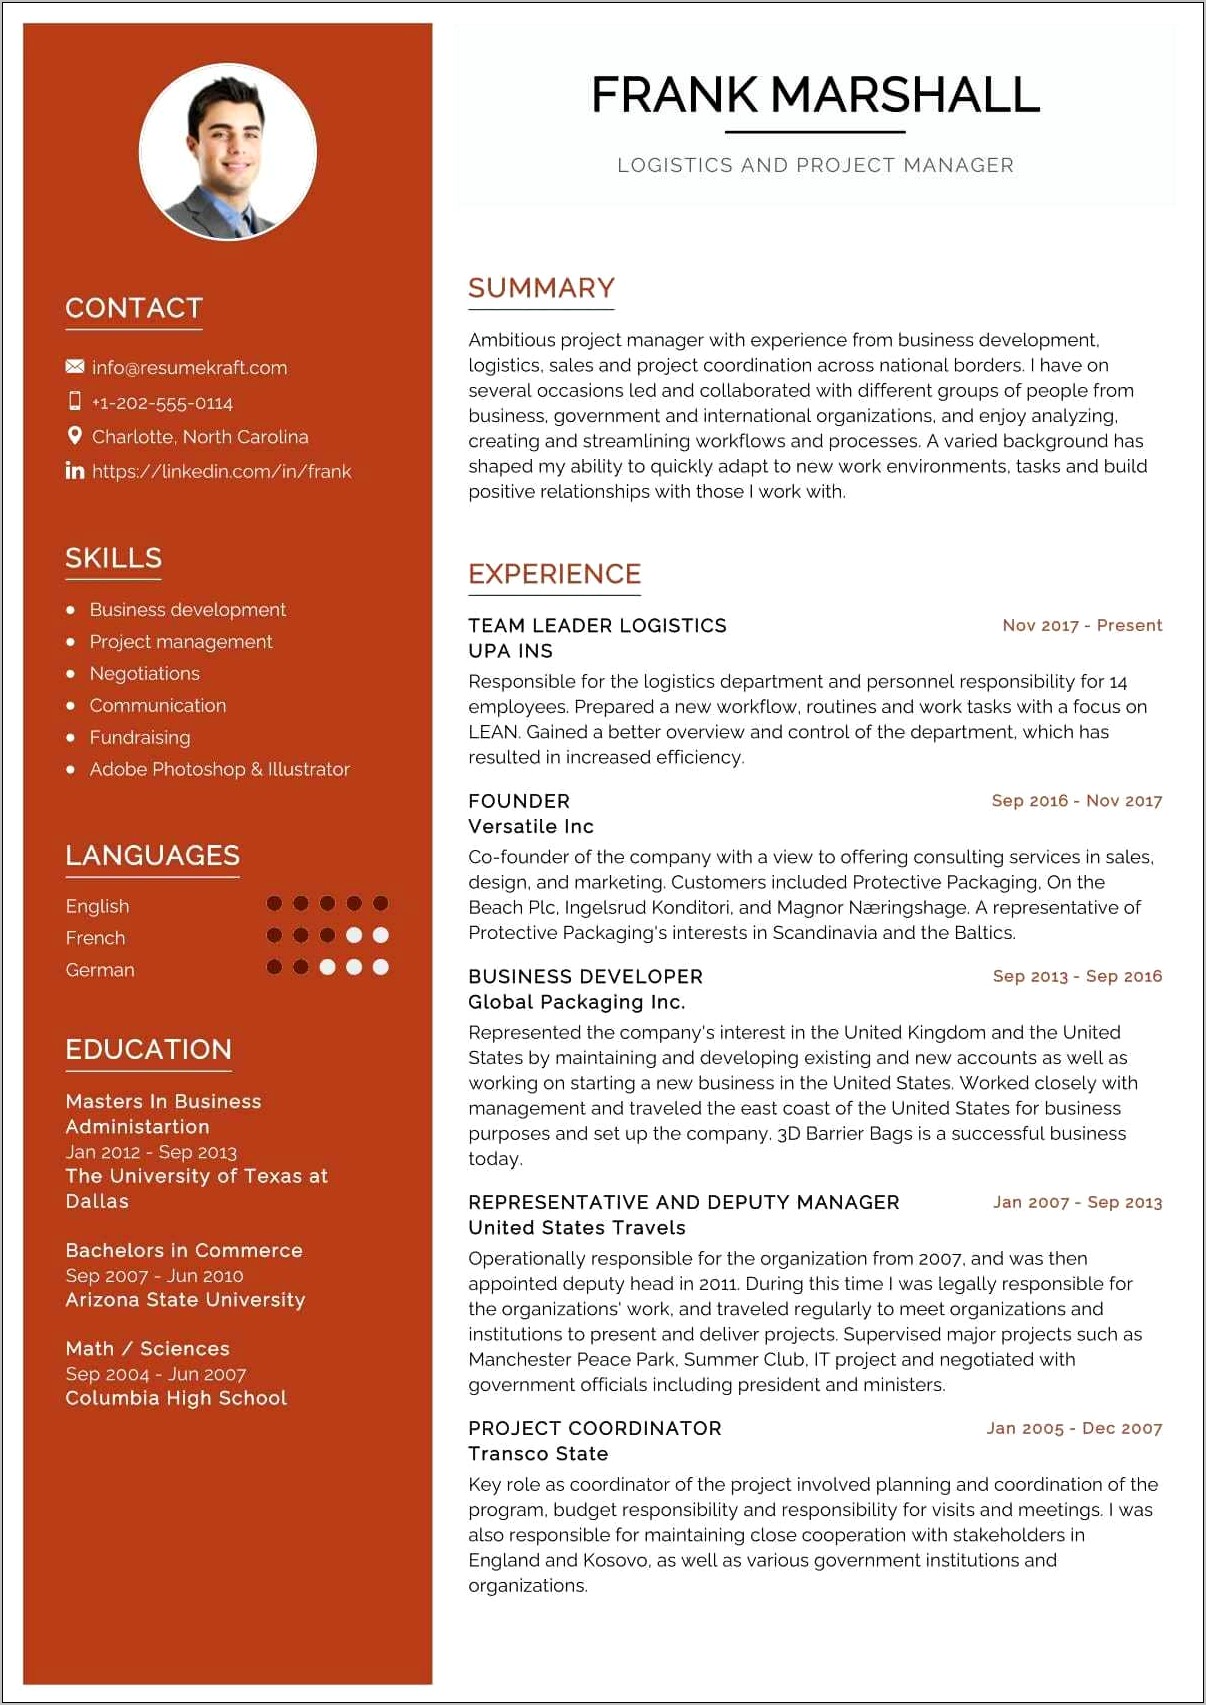 Resume Objective Freight Manager Examples